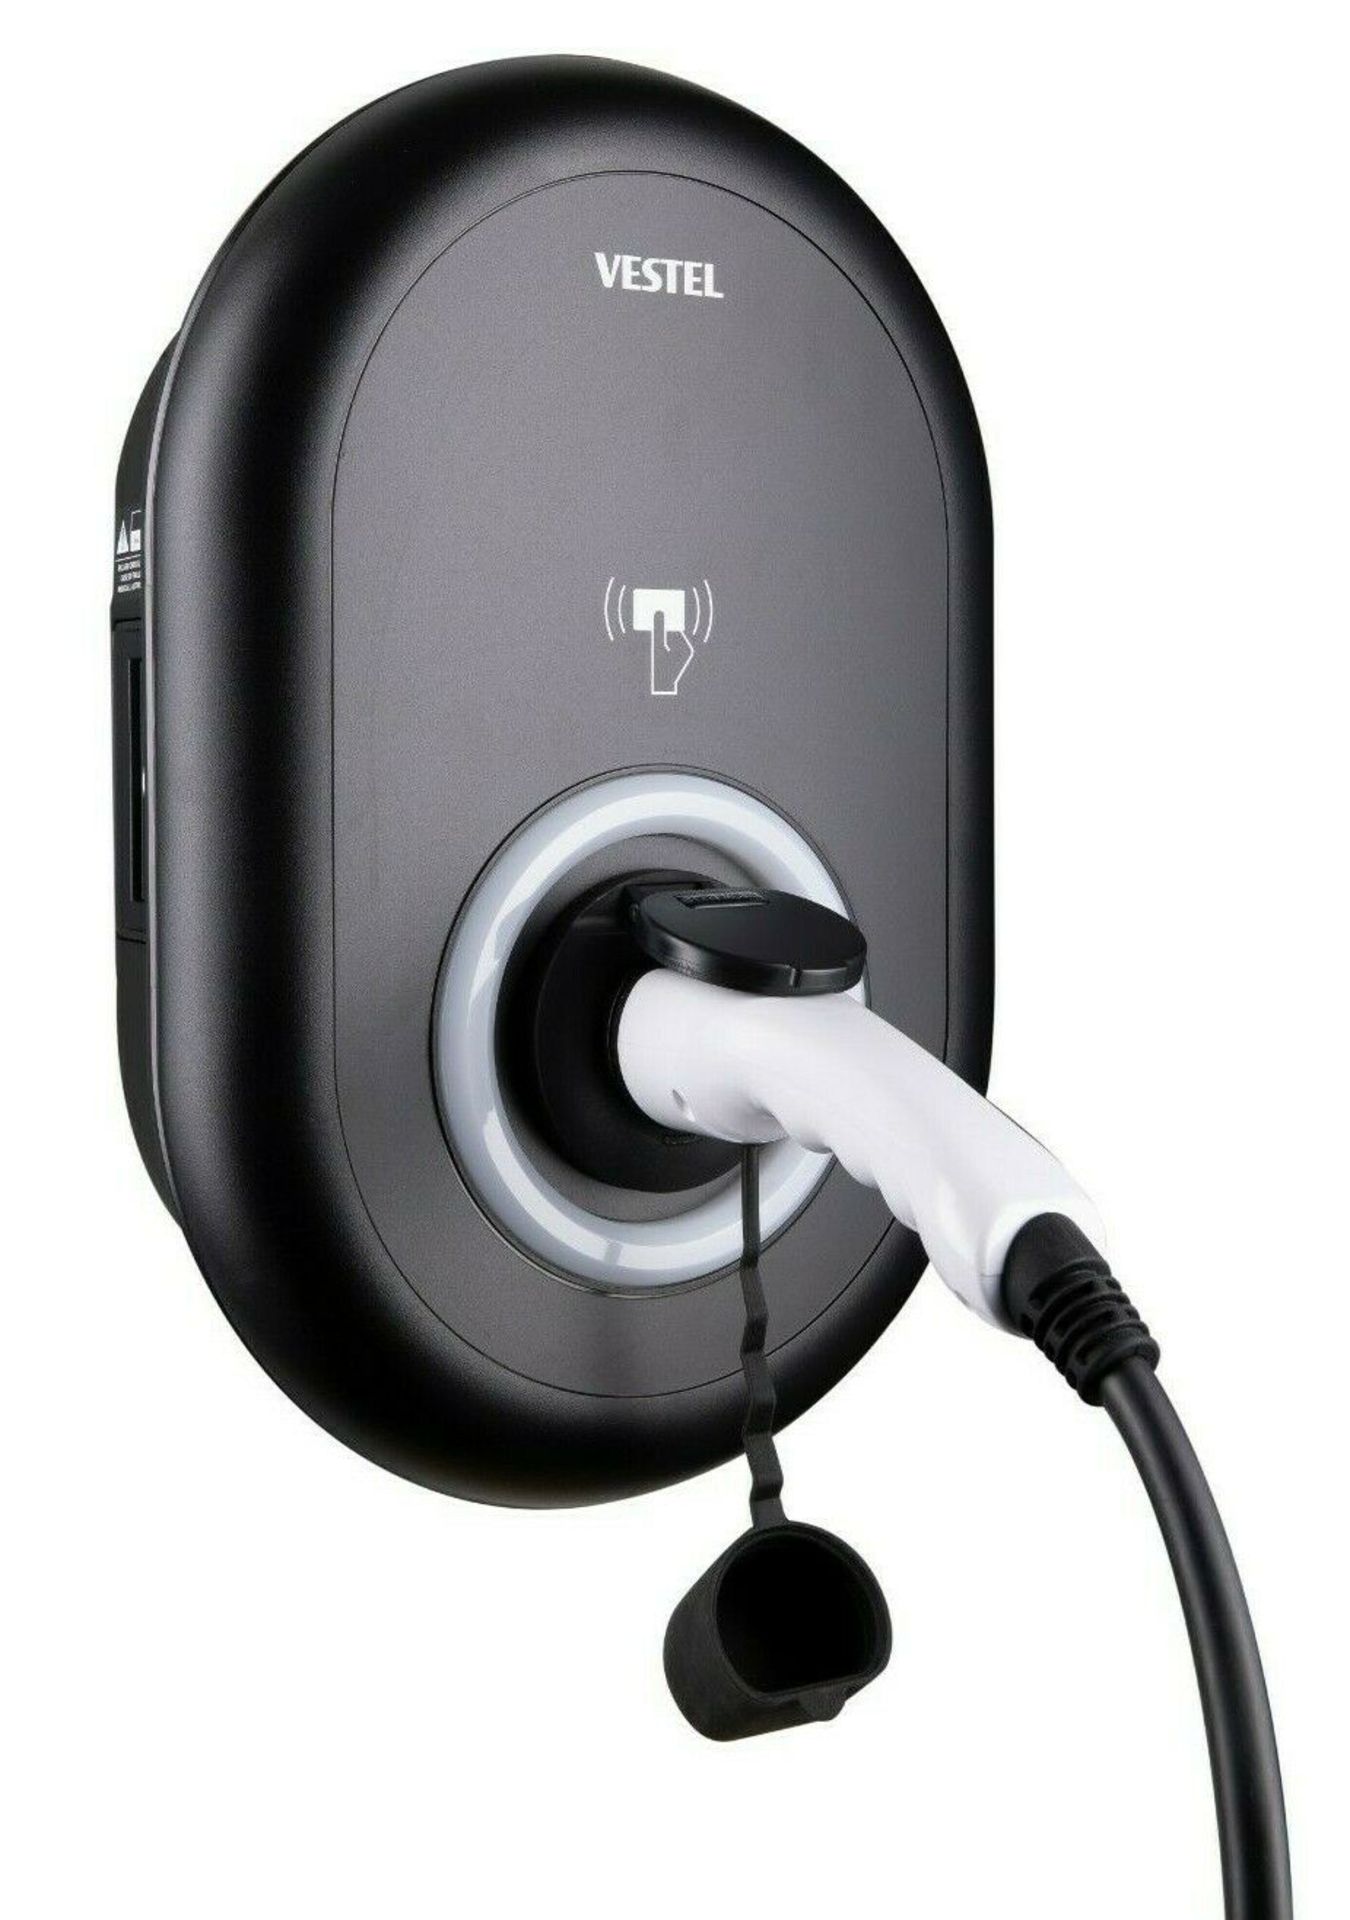 Vestel electric vehicle charger - Image 2 of 7